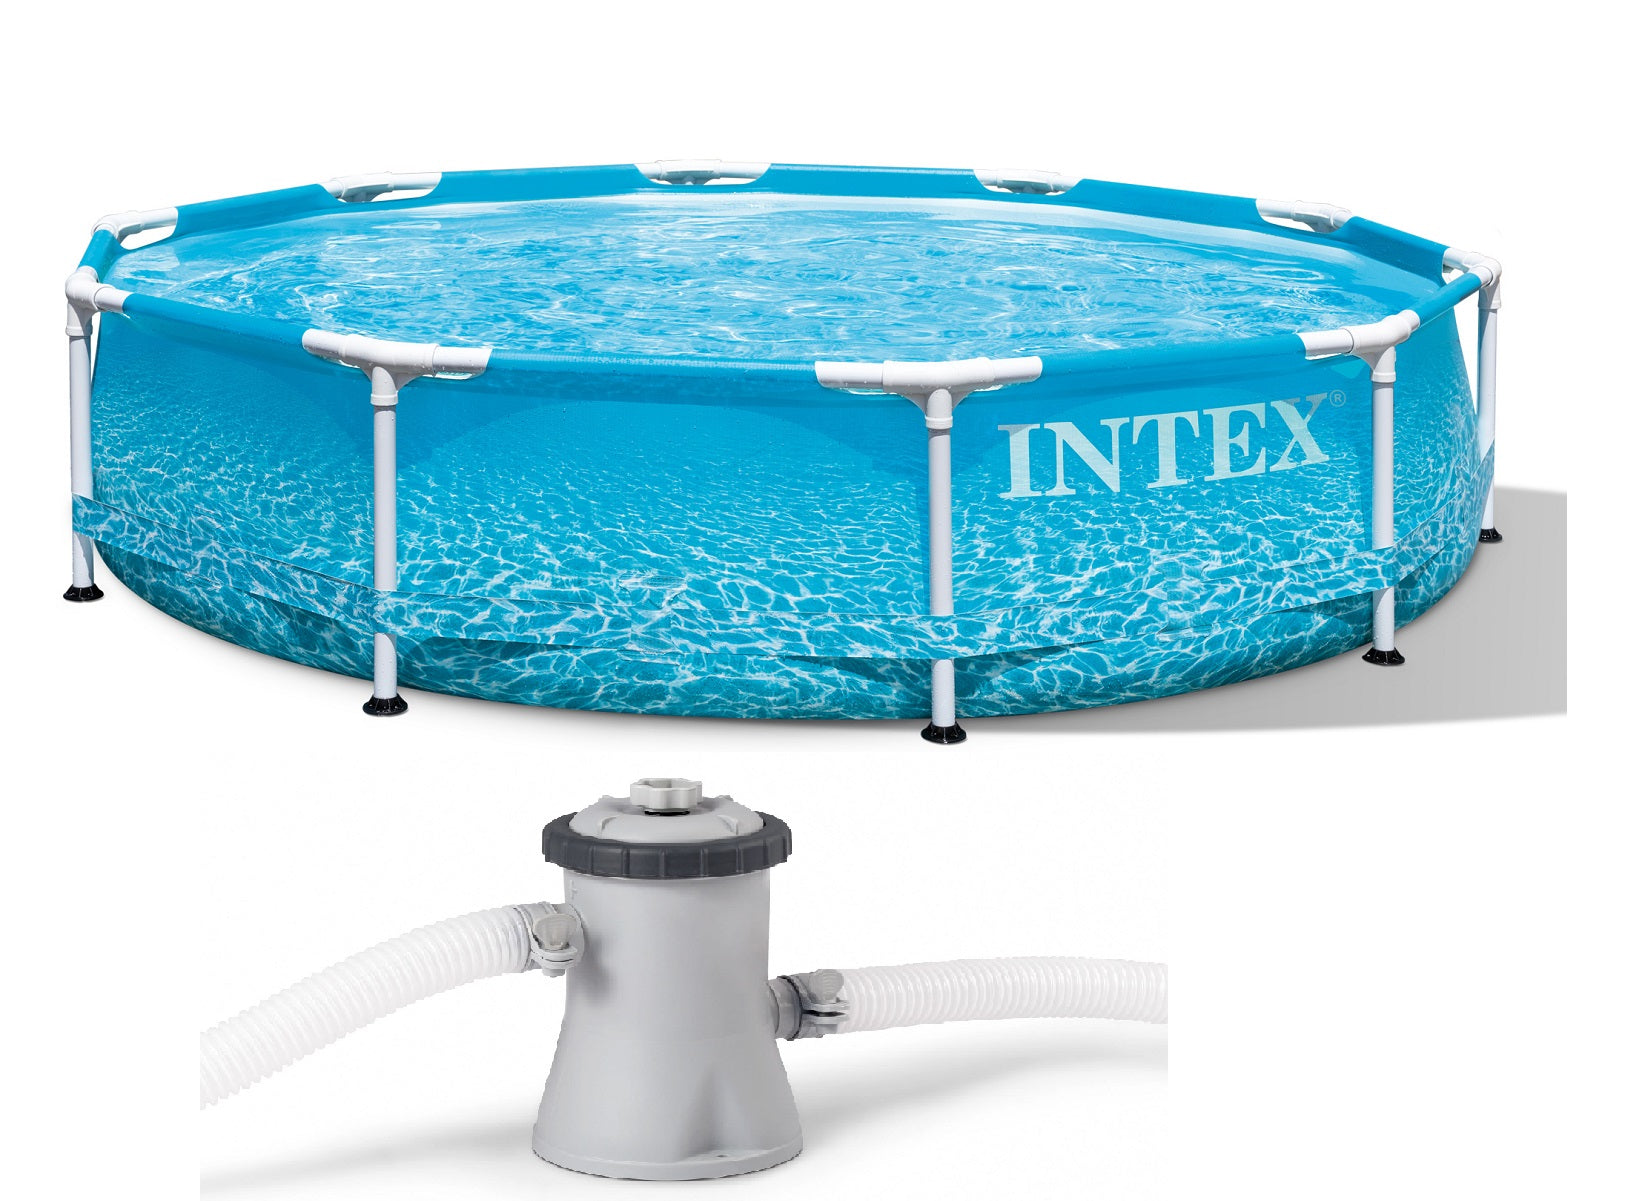 Intex 28207EH 10' x 30" Beachside Metal Frame Above Ground Swimming Pool with Pump